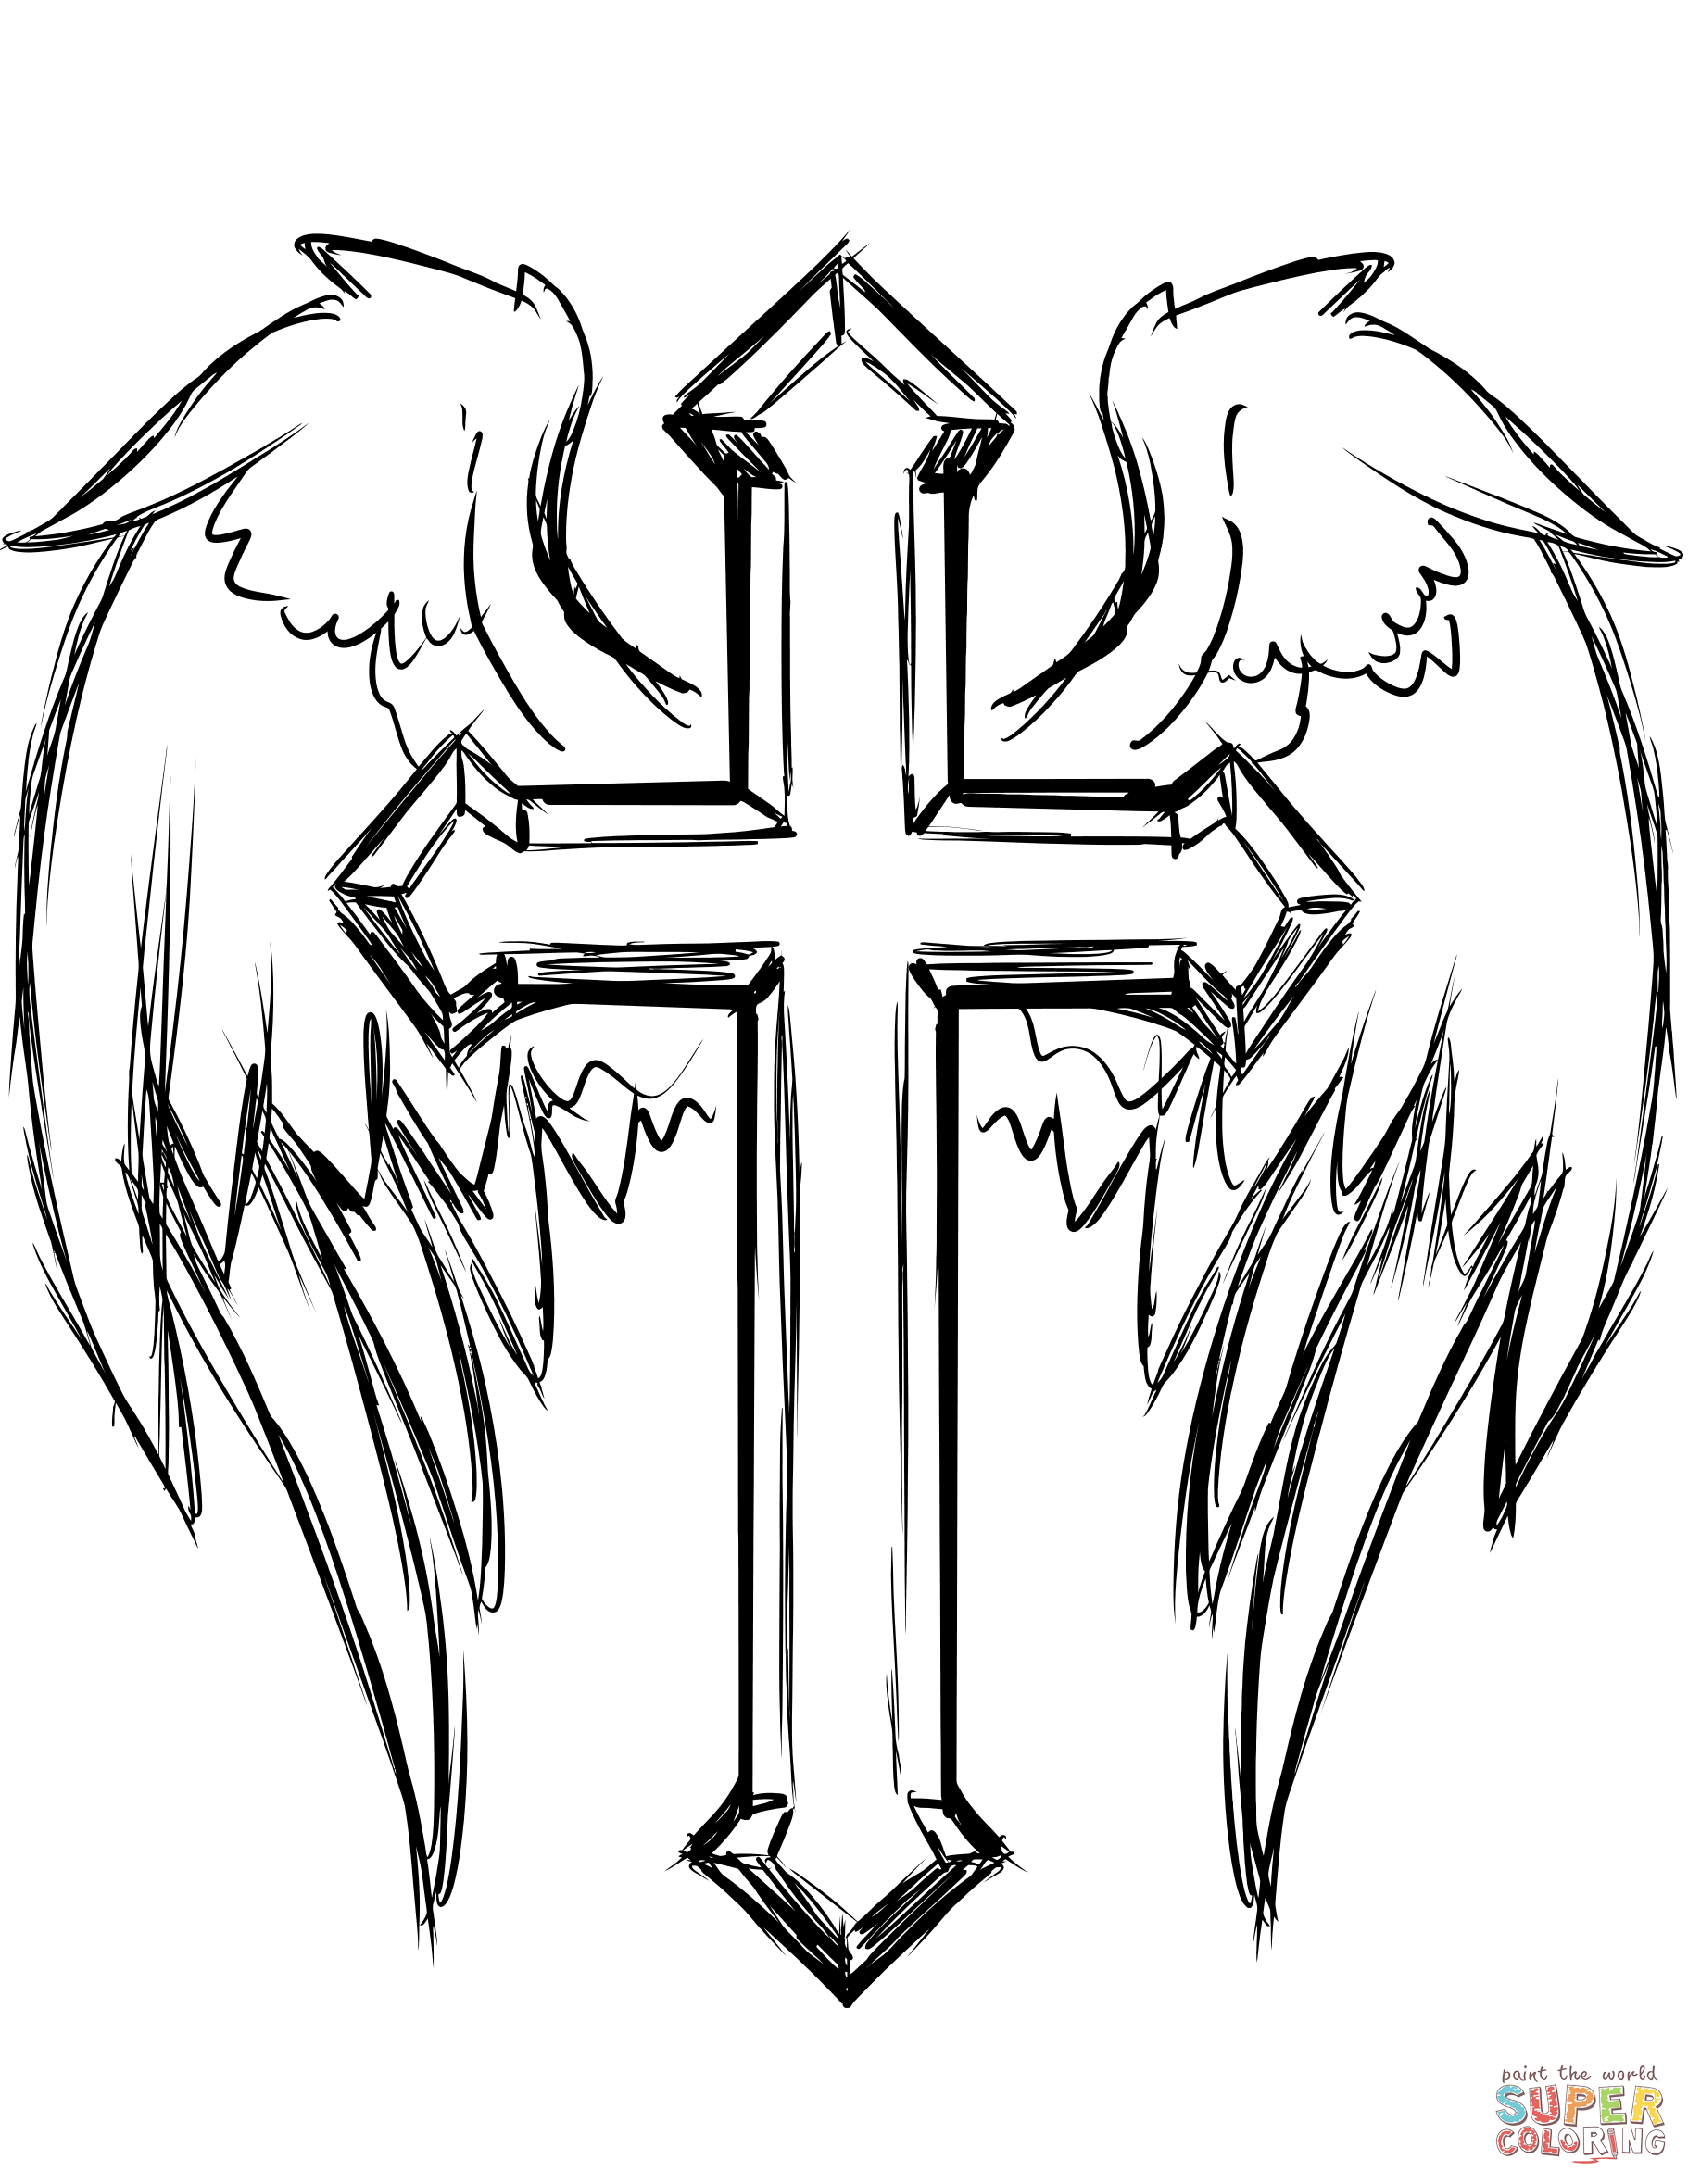 Cross with wings coloring page free printable coloring pages